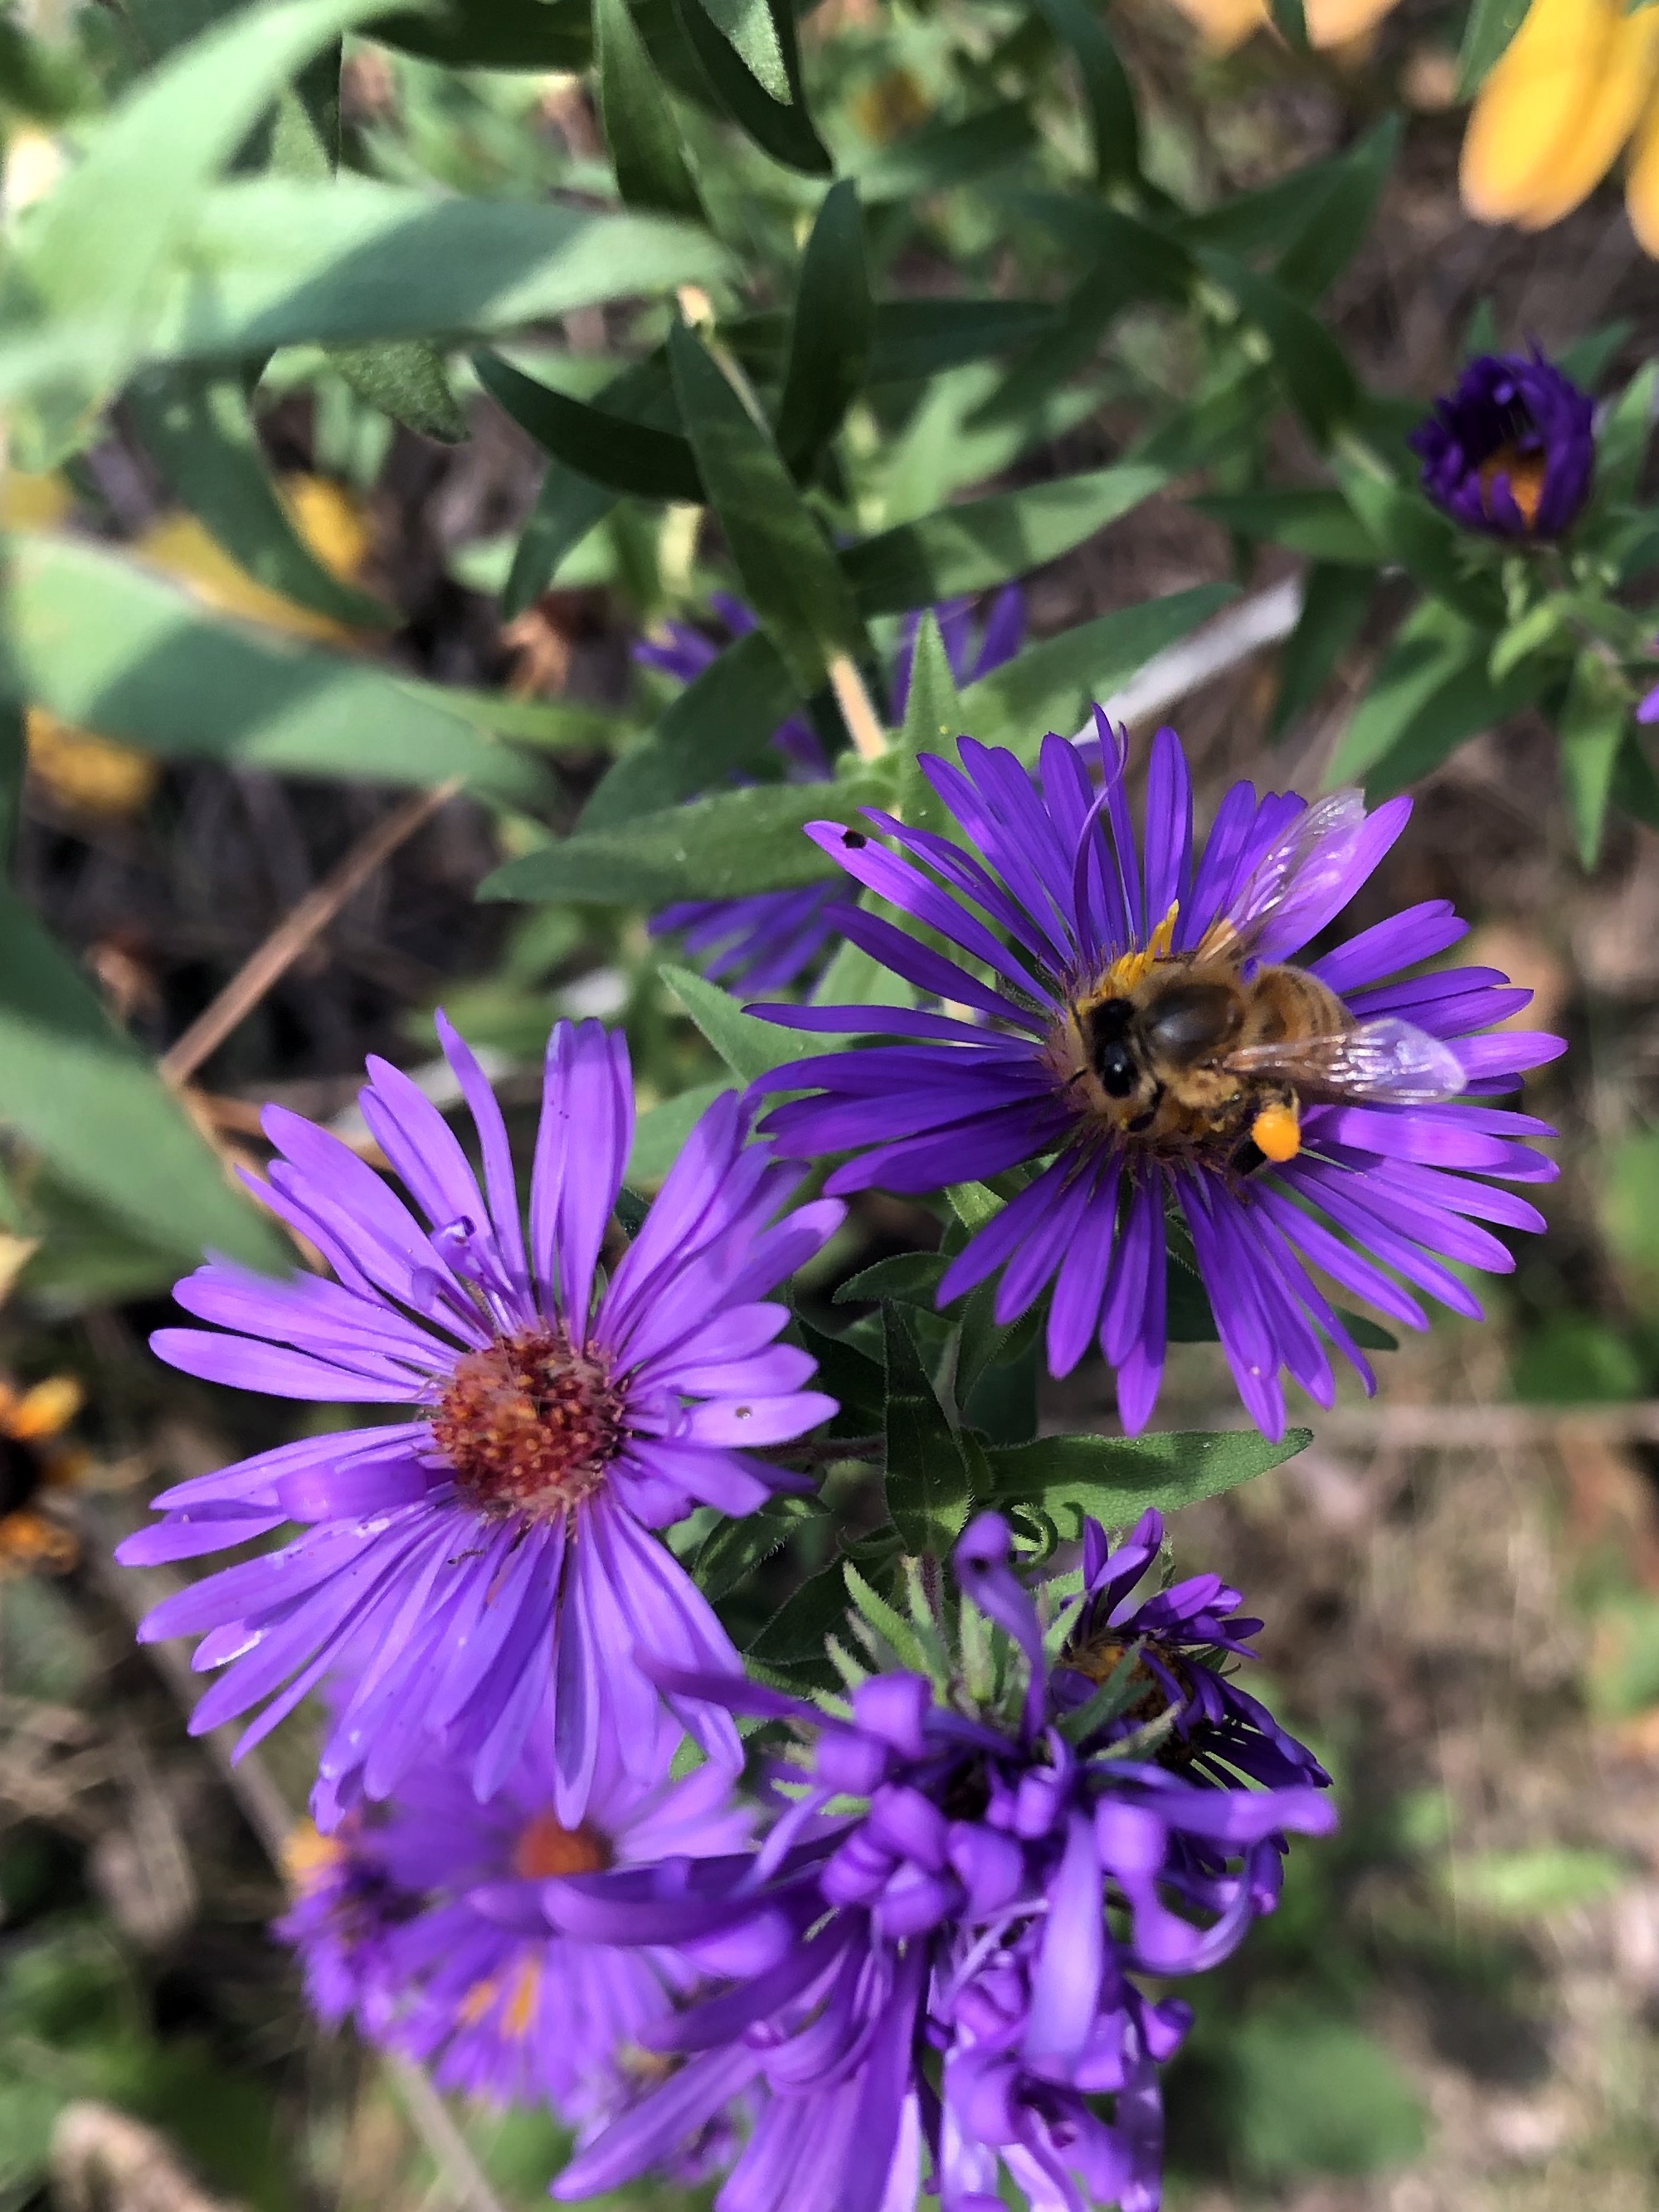 New England Aster along bike path behind Gregory Street in Madison, Wisconsin on October 2, 2021.